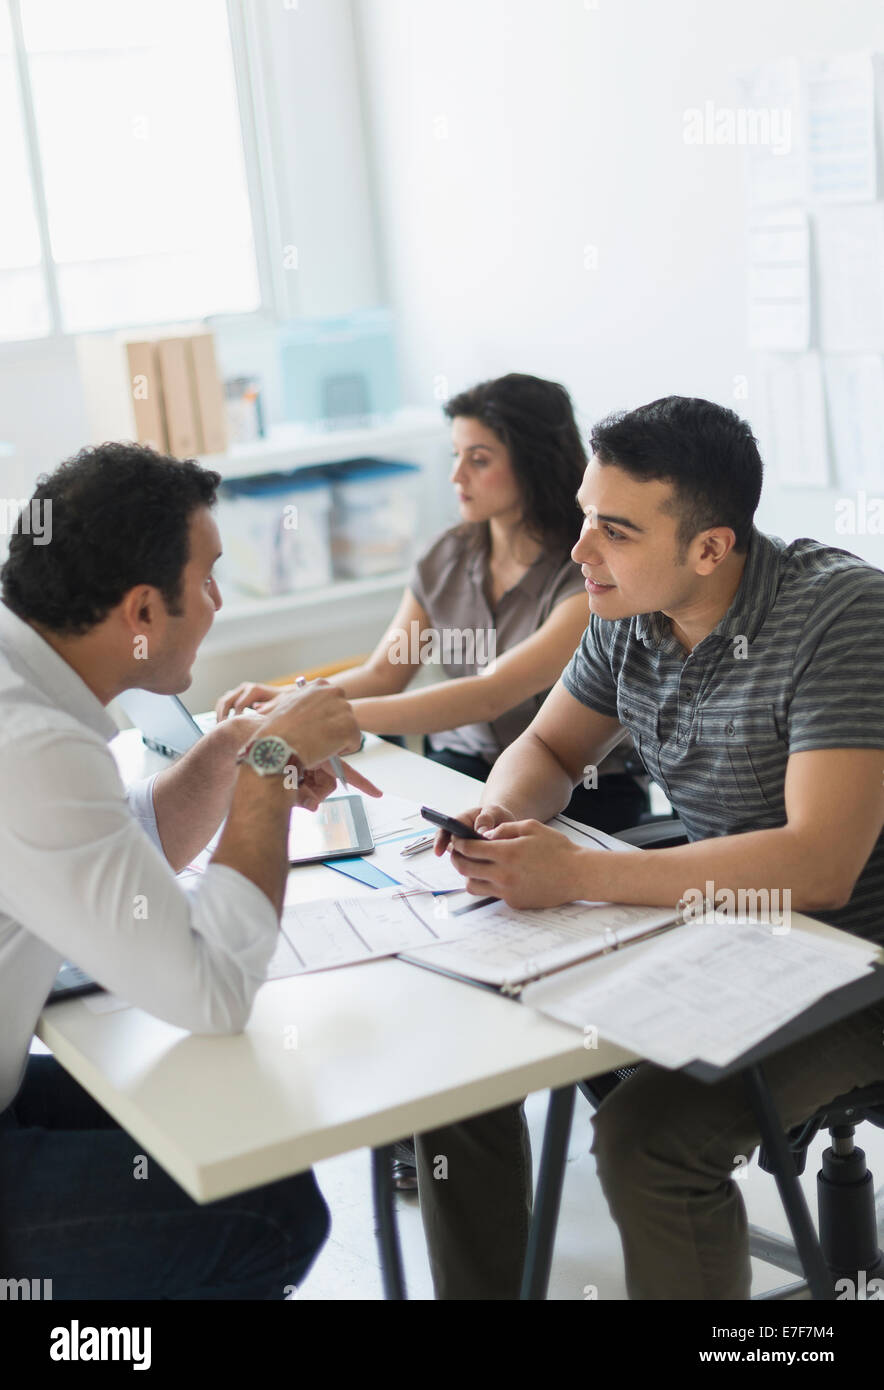 Hispanic business people working together in office Stock Photo